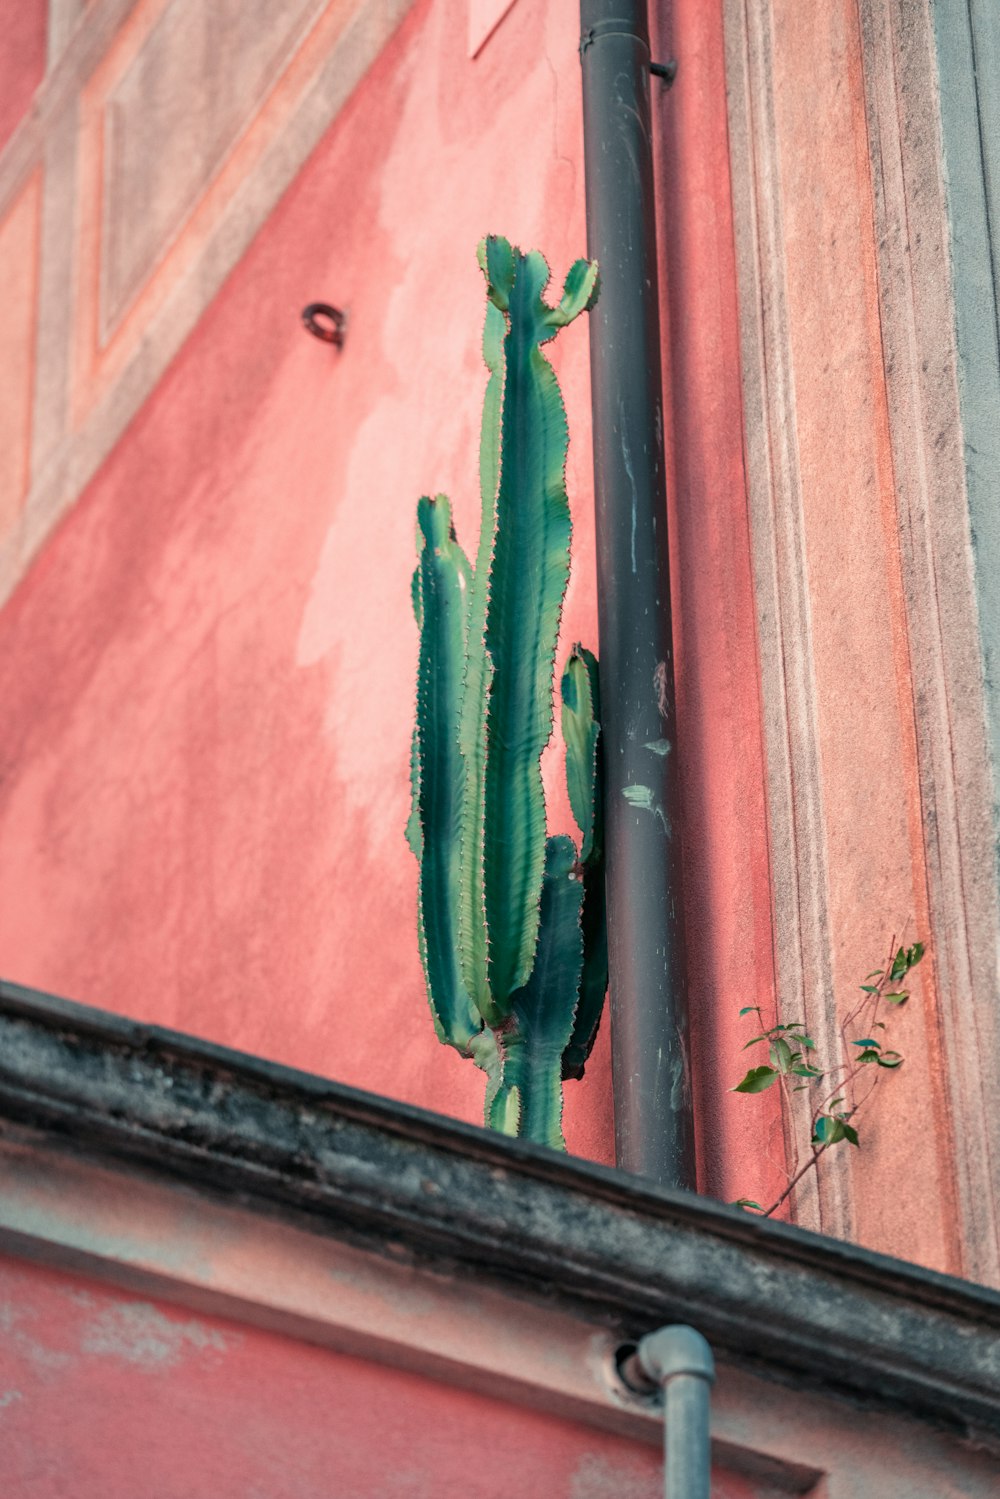 a green cactus is growing on the side of a building